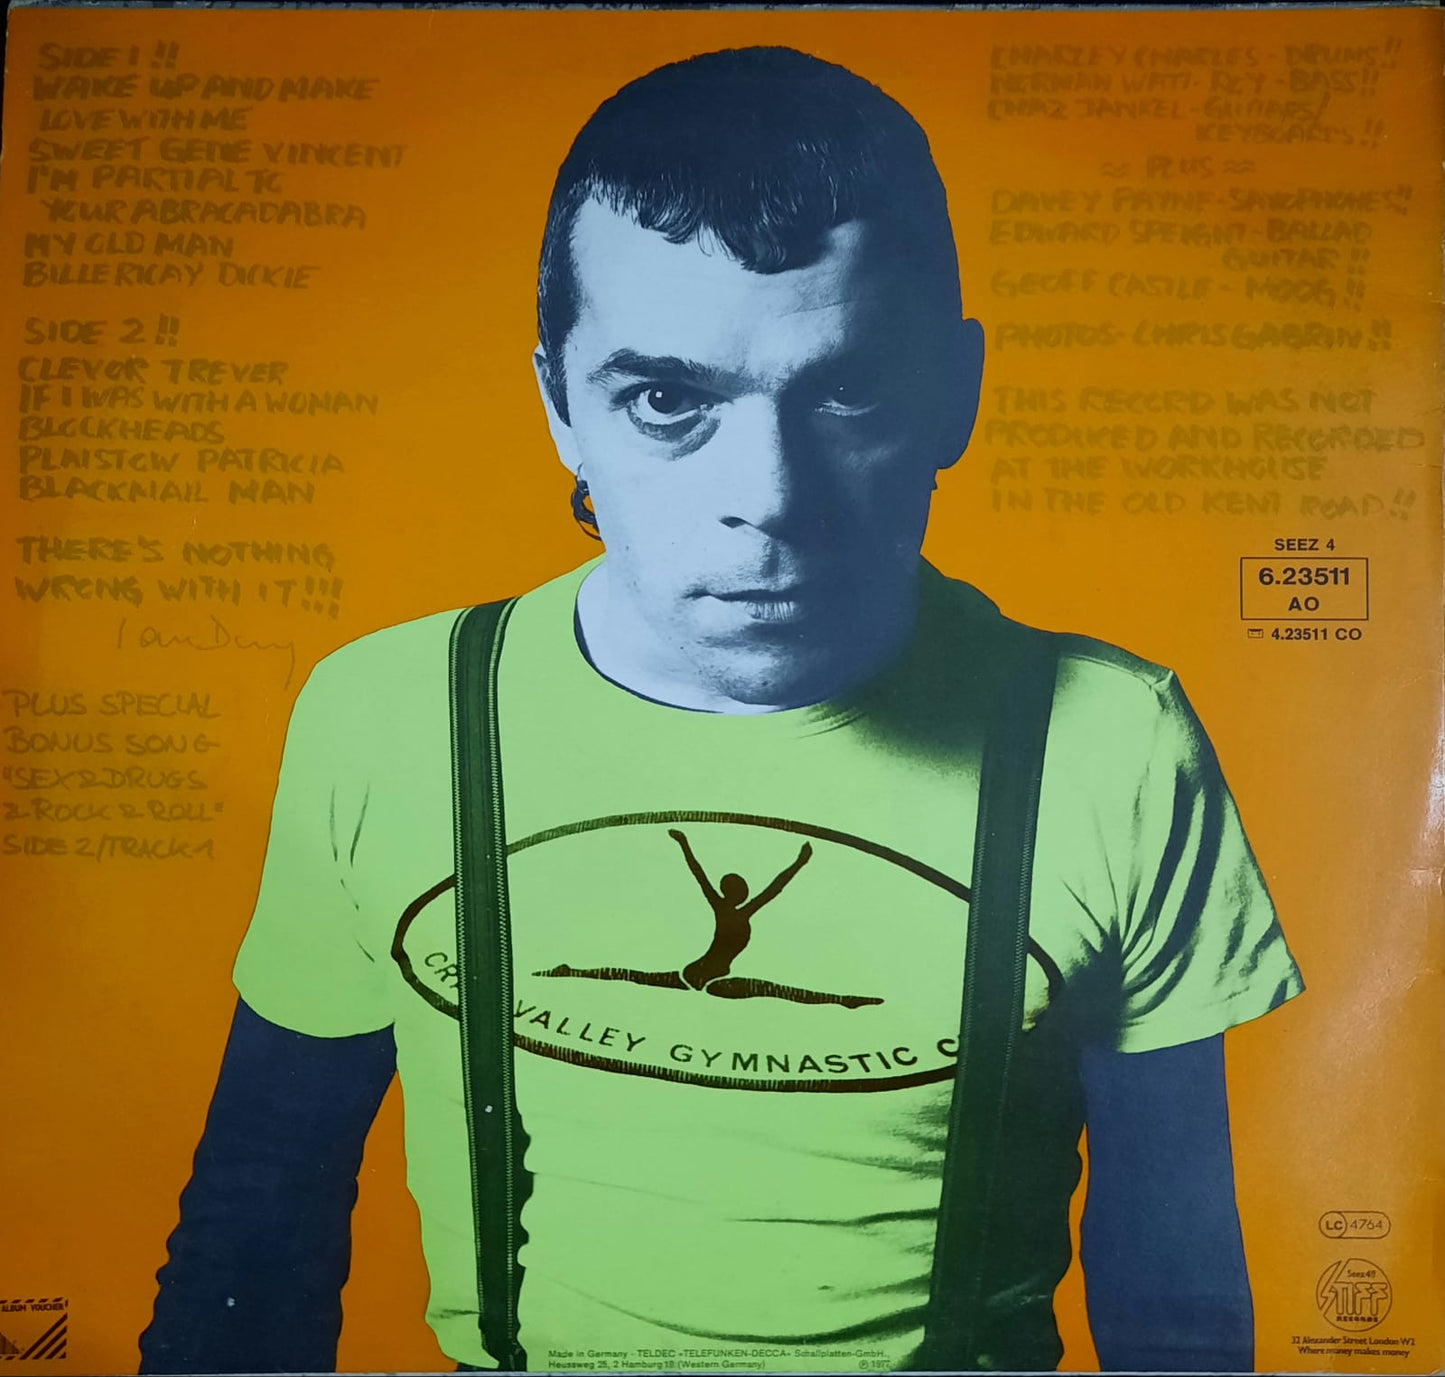 Ian Dury – New Boots And Panties!! (LP, Alemania, 1978)